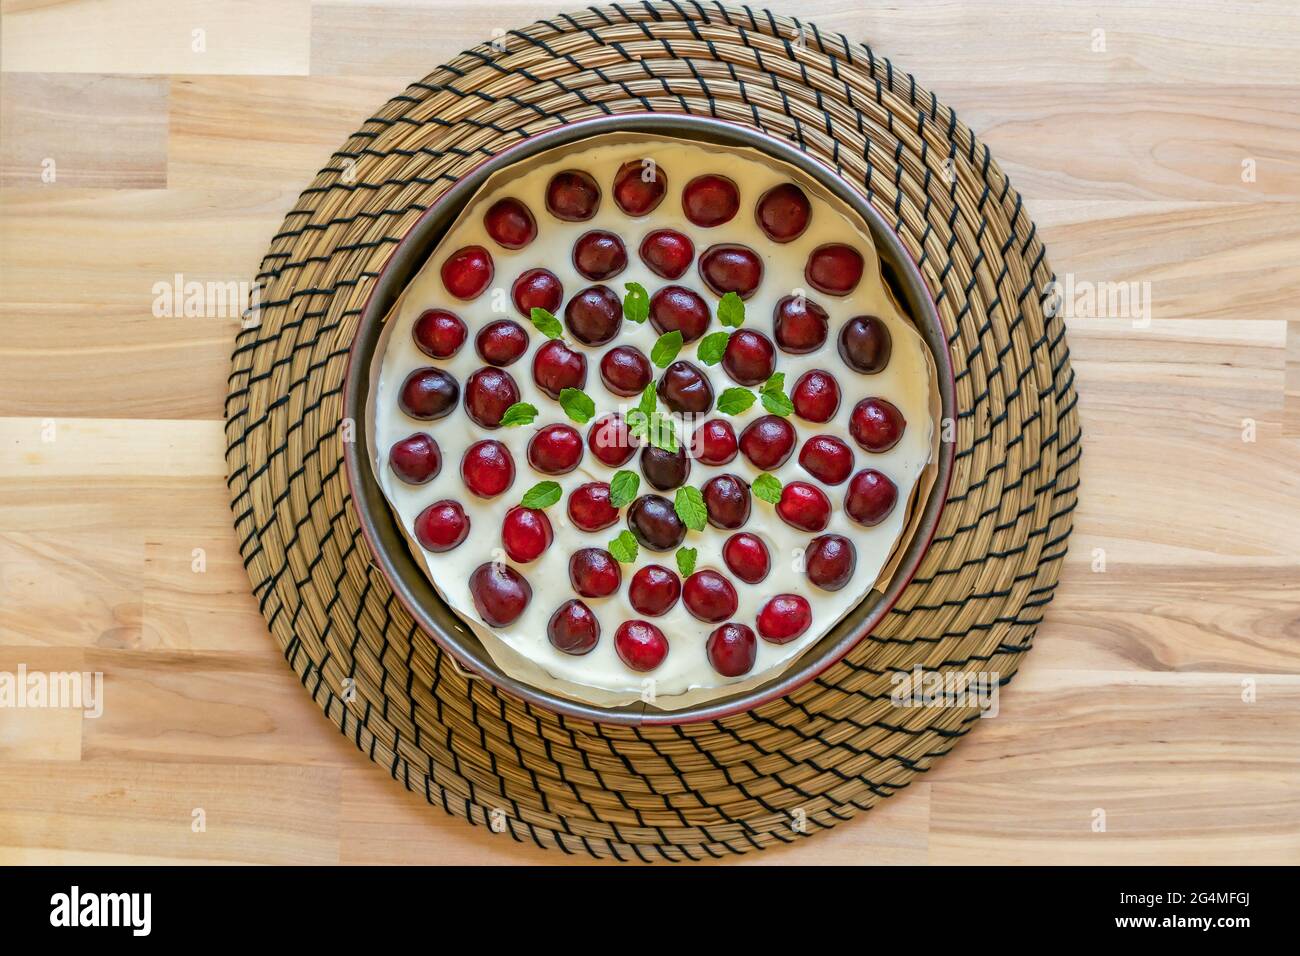 Homemade cheesecake is topped with fresh cherries and a sprig of mint in round cake pan on wooden table Stock Photo